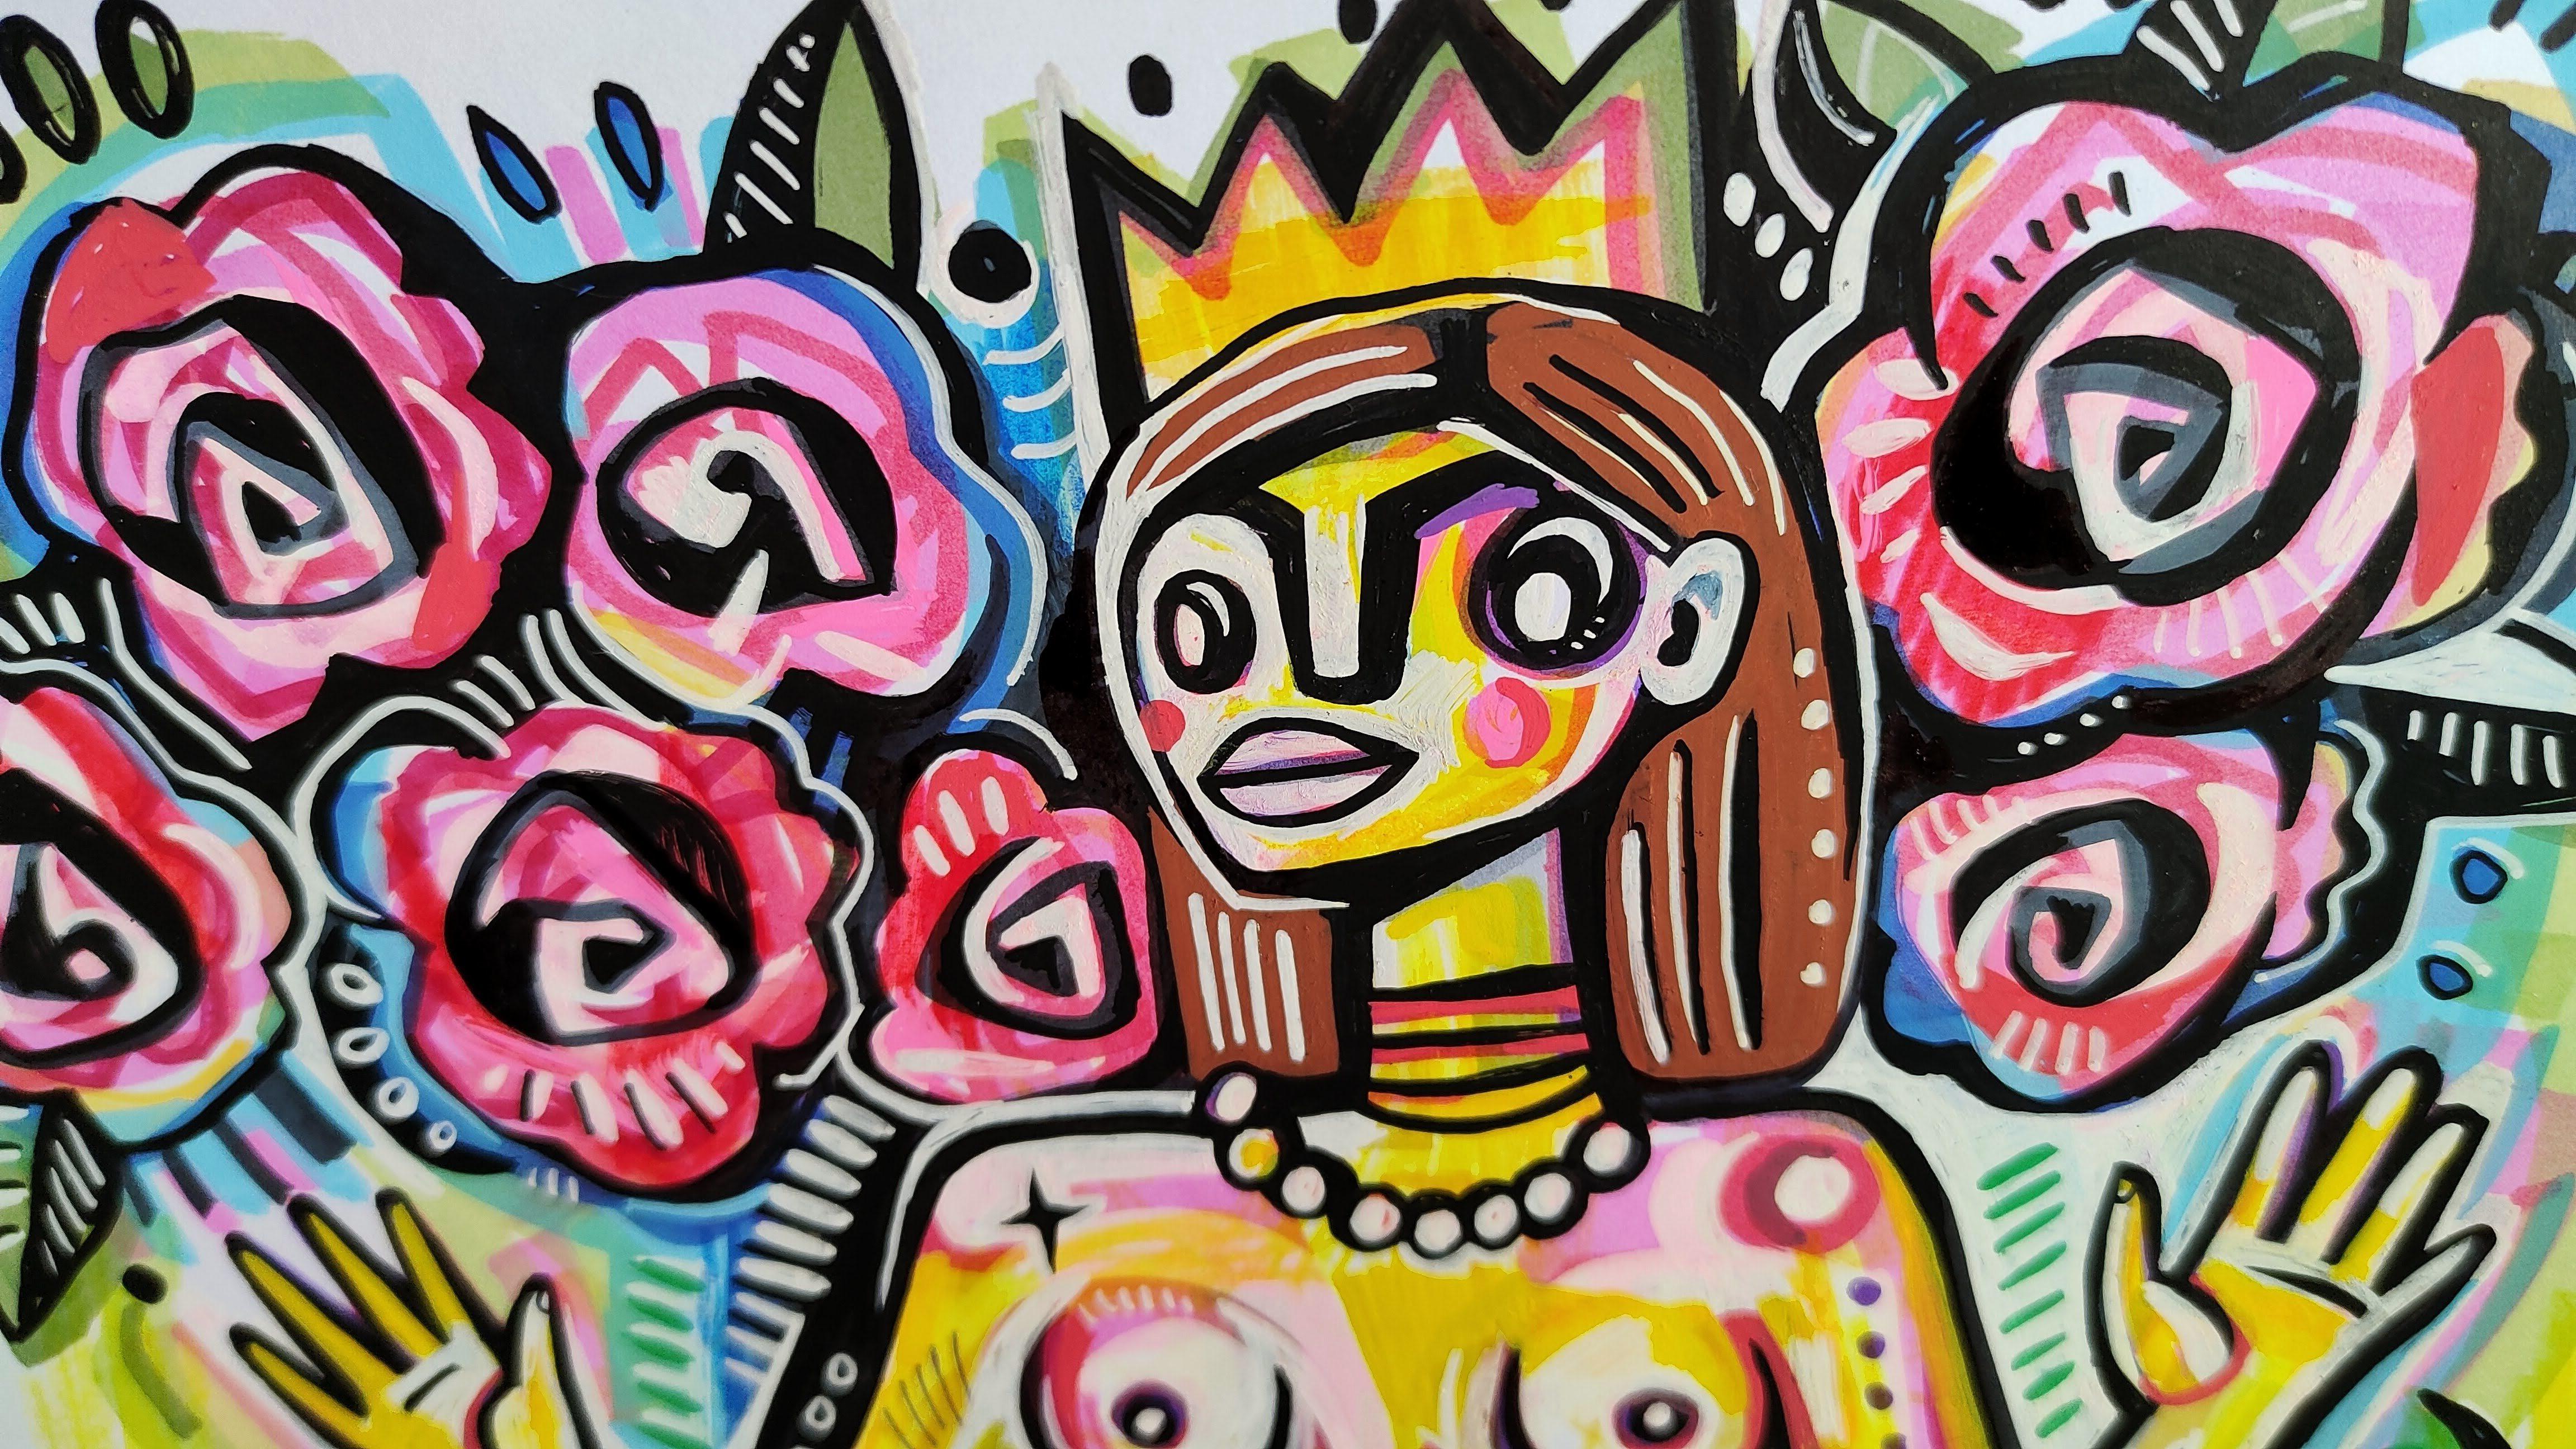 Markers on paper
Original art by Daria Kusto.
Shipped well protected, unframed.


